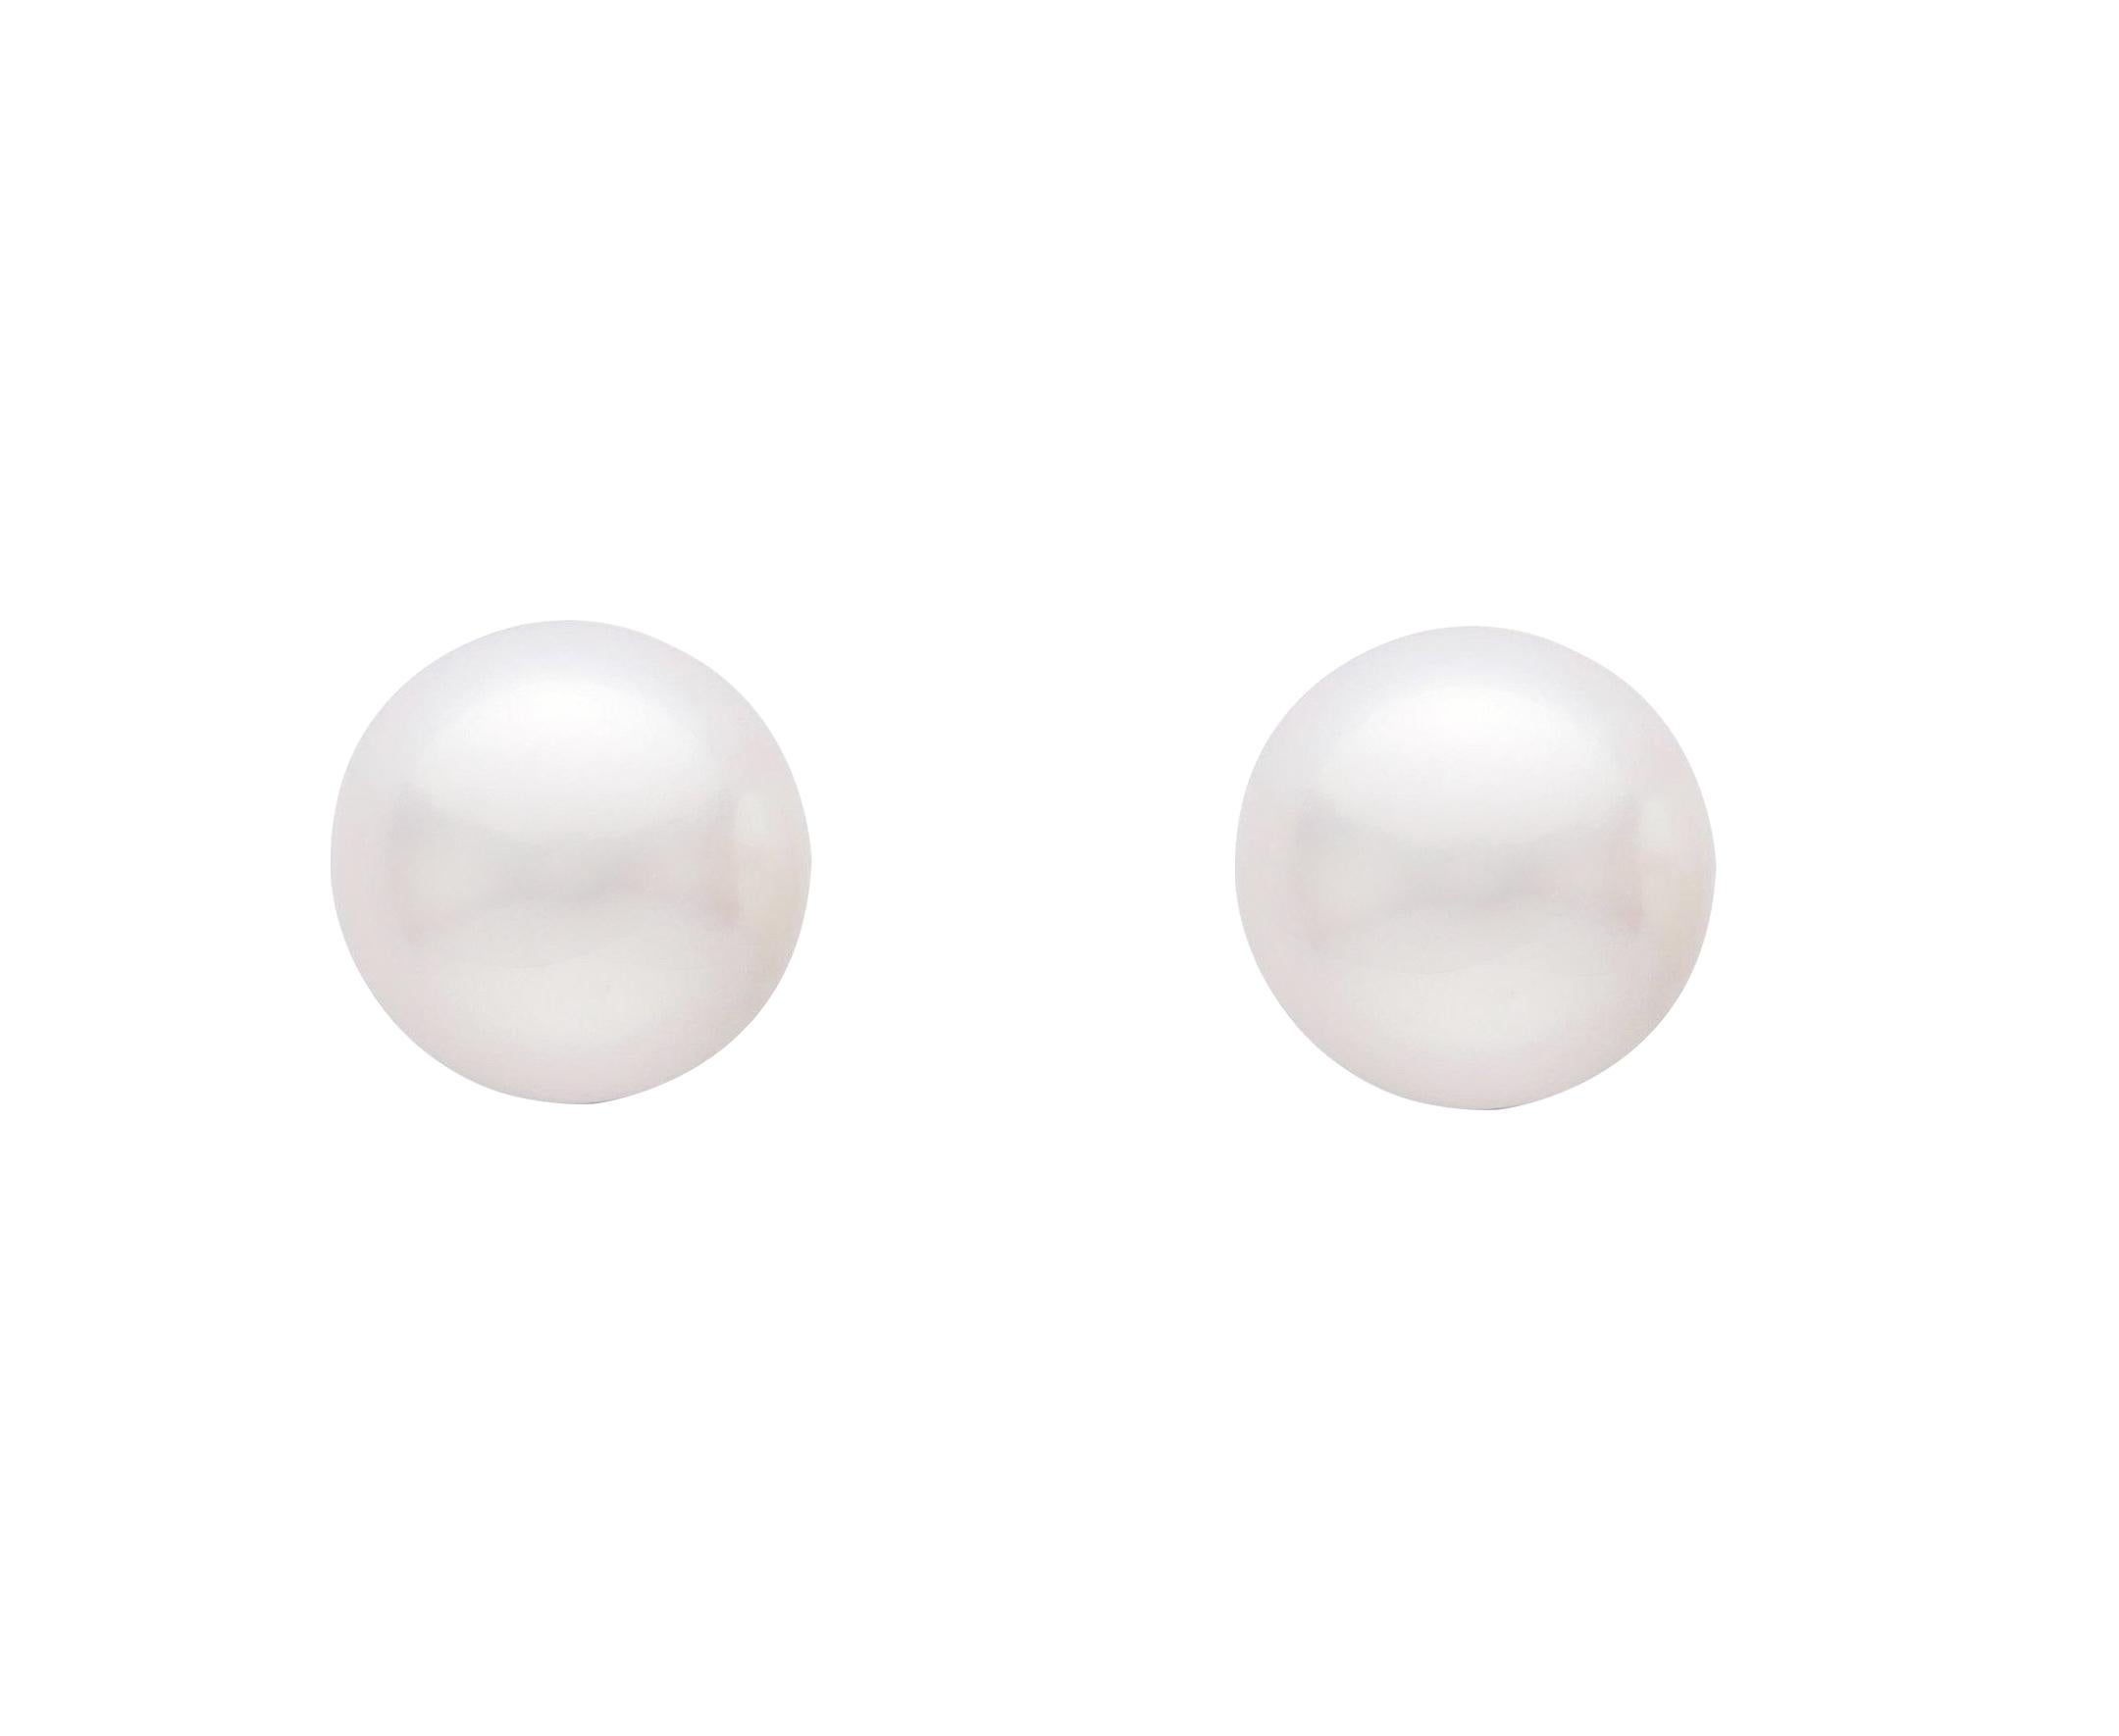 These classic studs feature Chinese Freshwater white, round cultured 9.5-10mm pearls mounted on 14 karat white gold. These wardrobe essentials serve as a perfect compliment to every outfit.